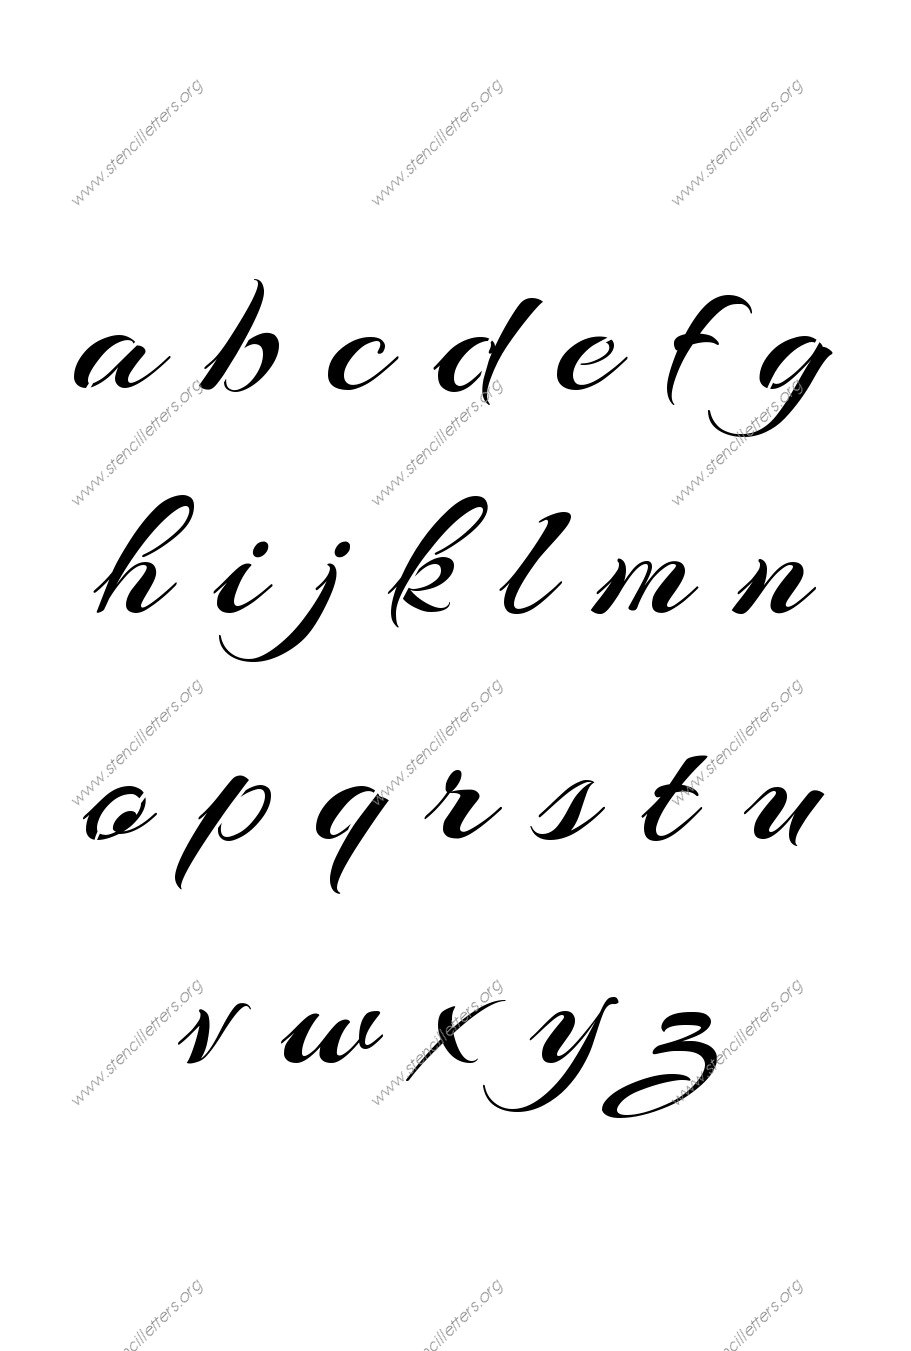 Brushed Cursive A to Z lowercase letter stencils